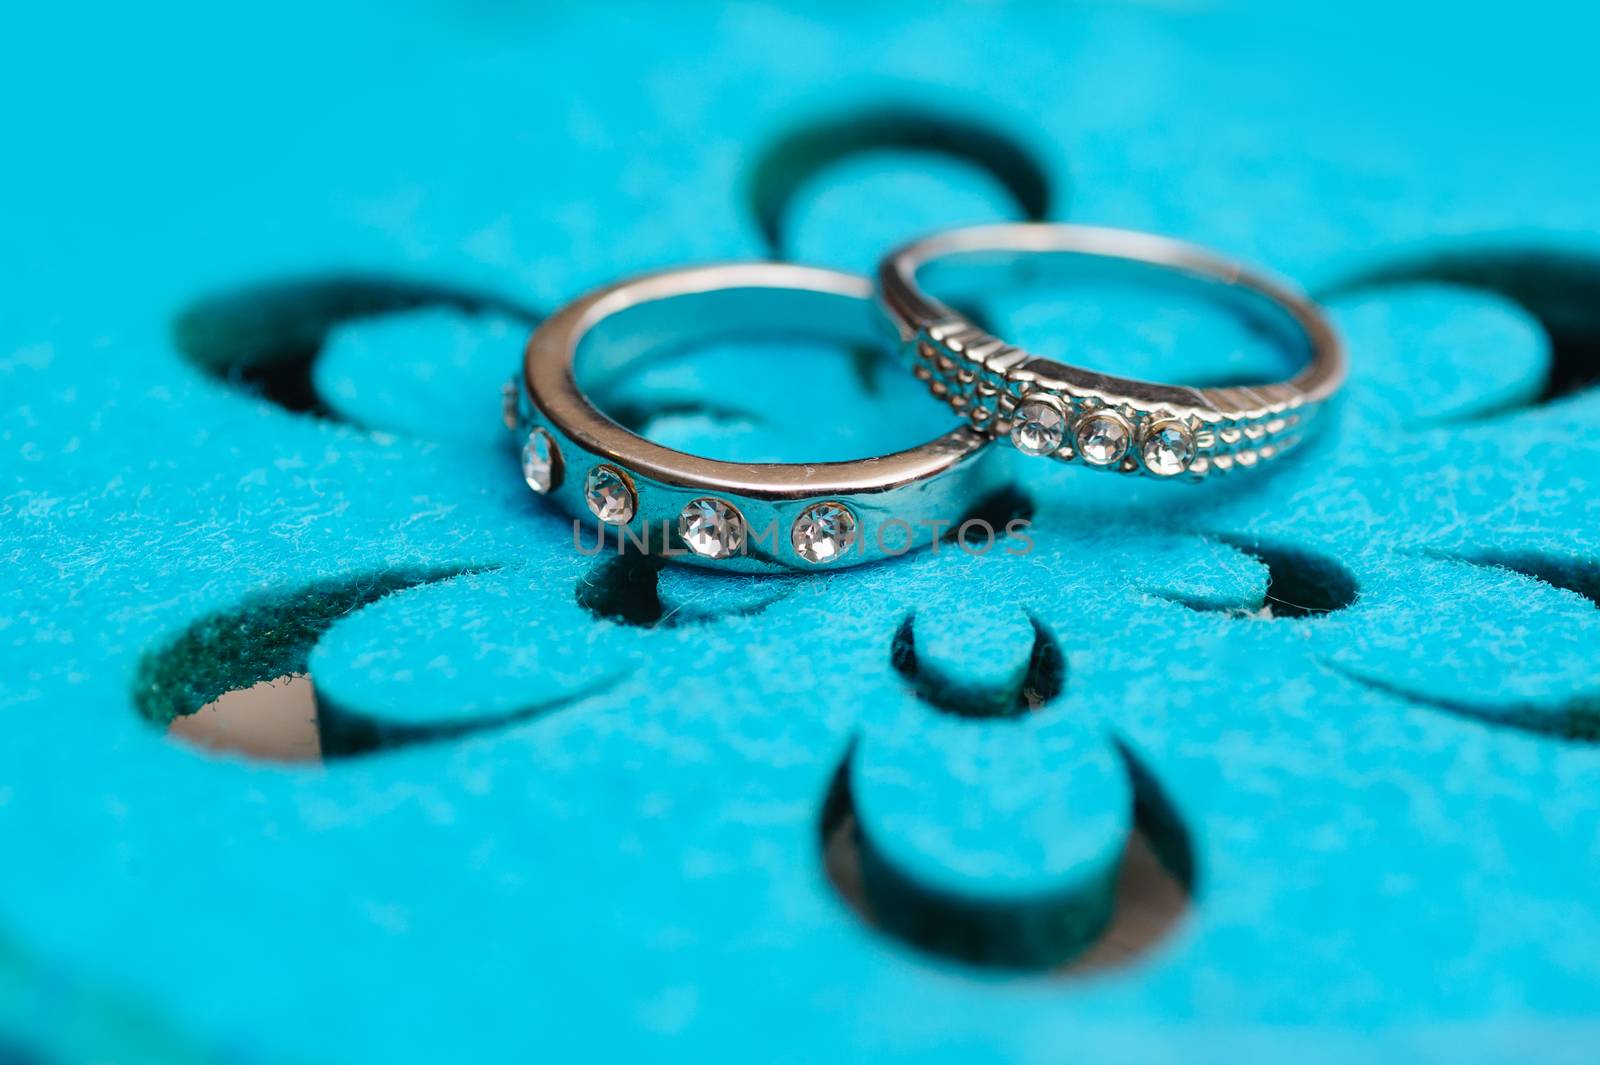 two wedding rings white gold on a turquoise background.